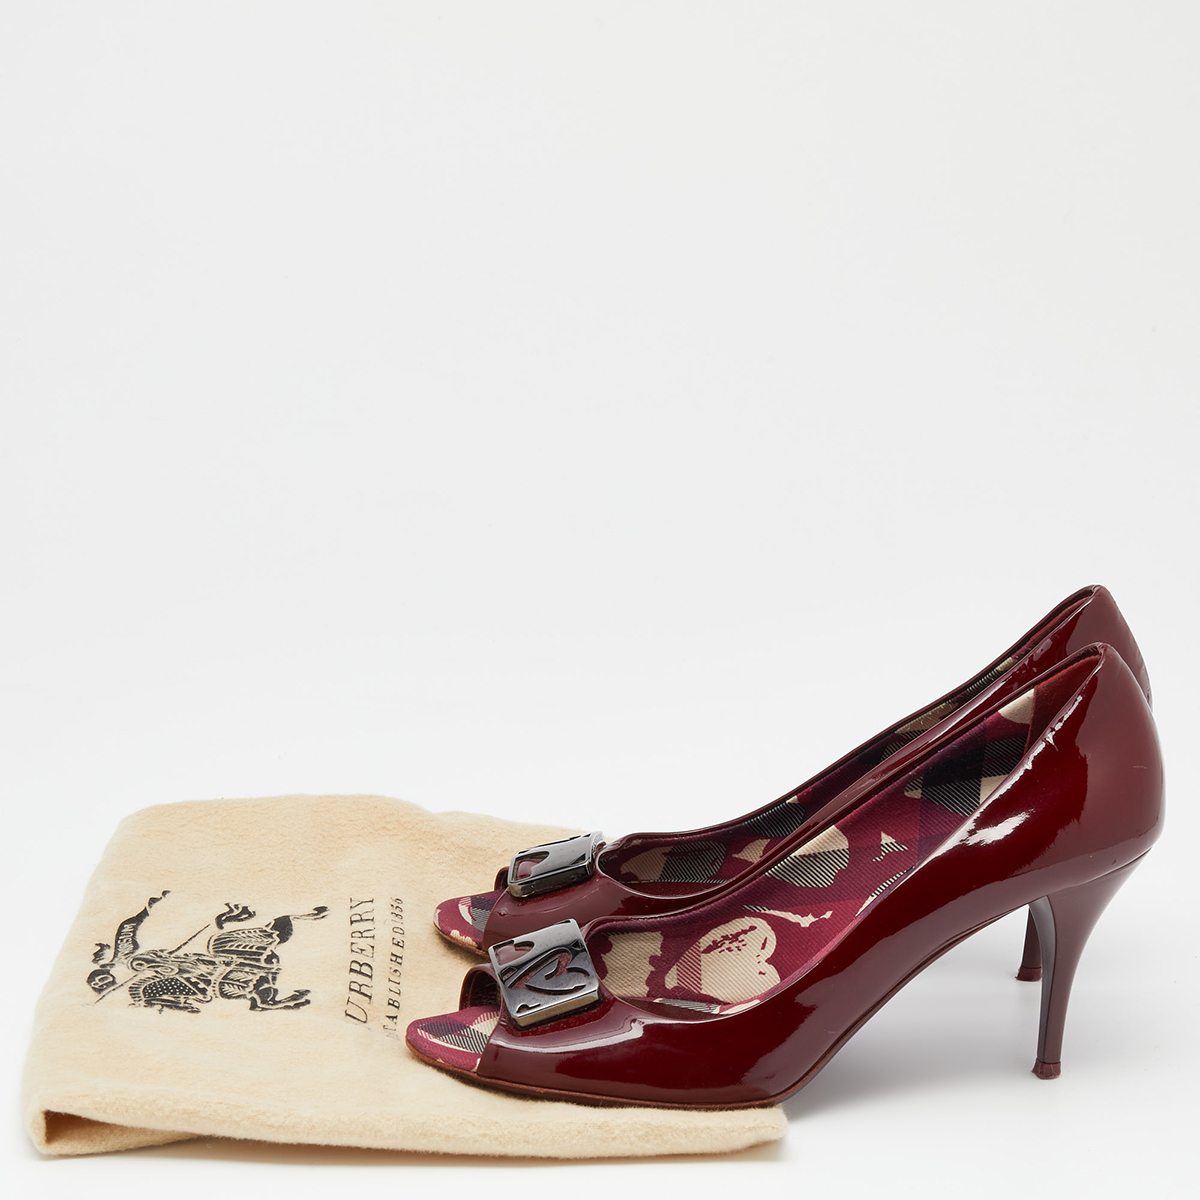 Burberry Burgundy Patent Leather Peep Toe Pumps Size 38